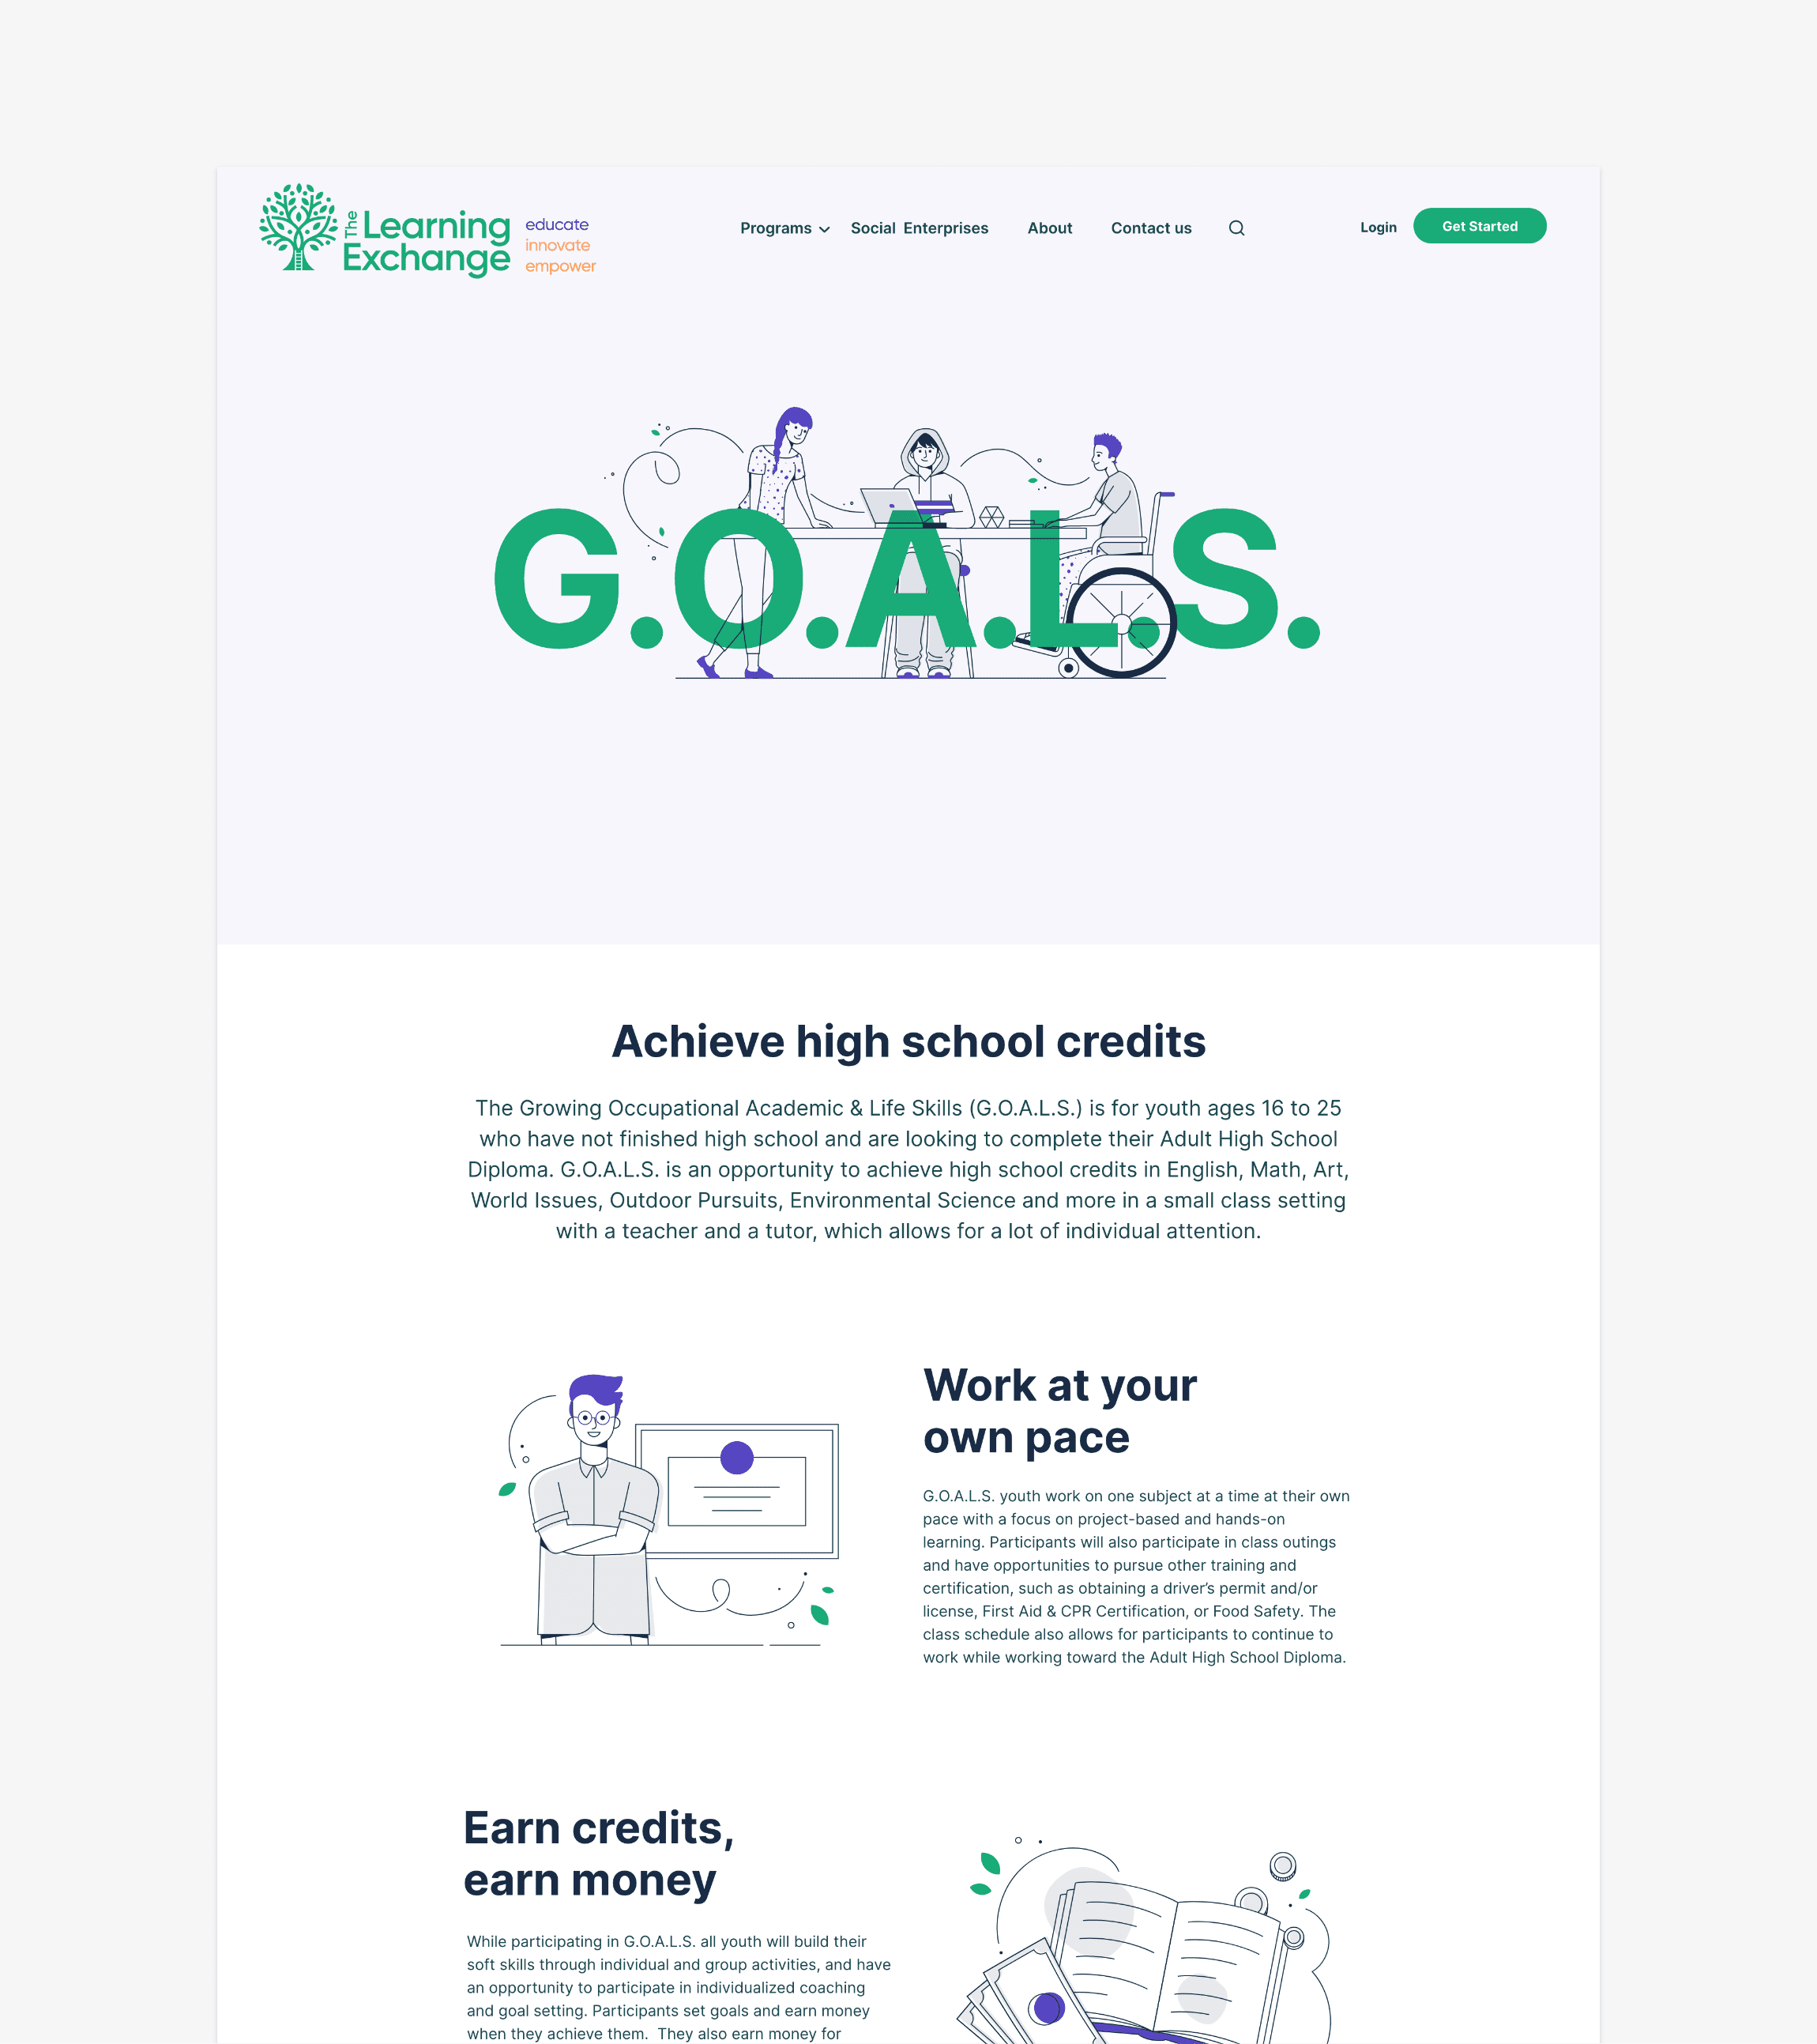 The Learning Exchange page design